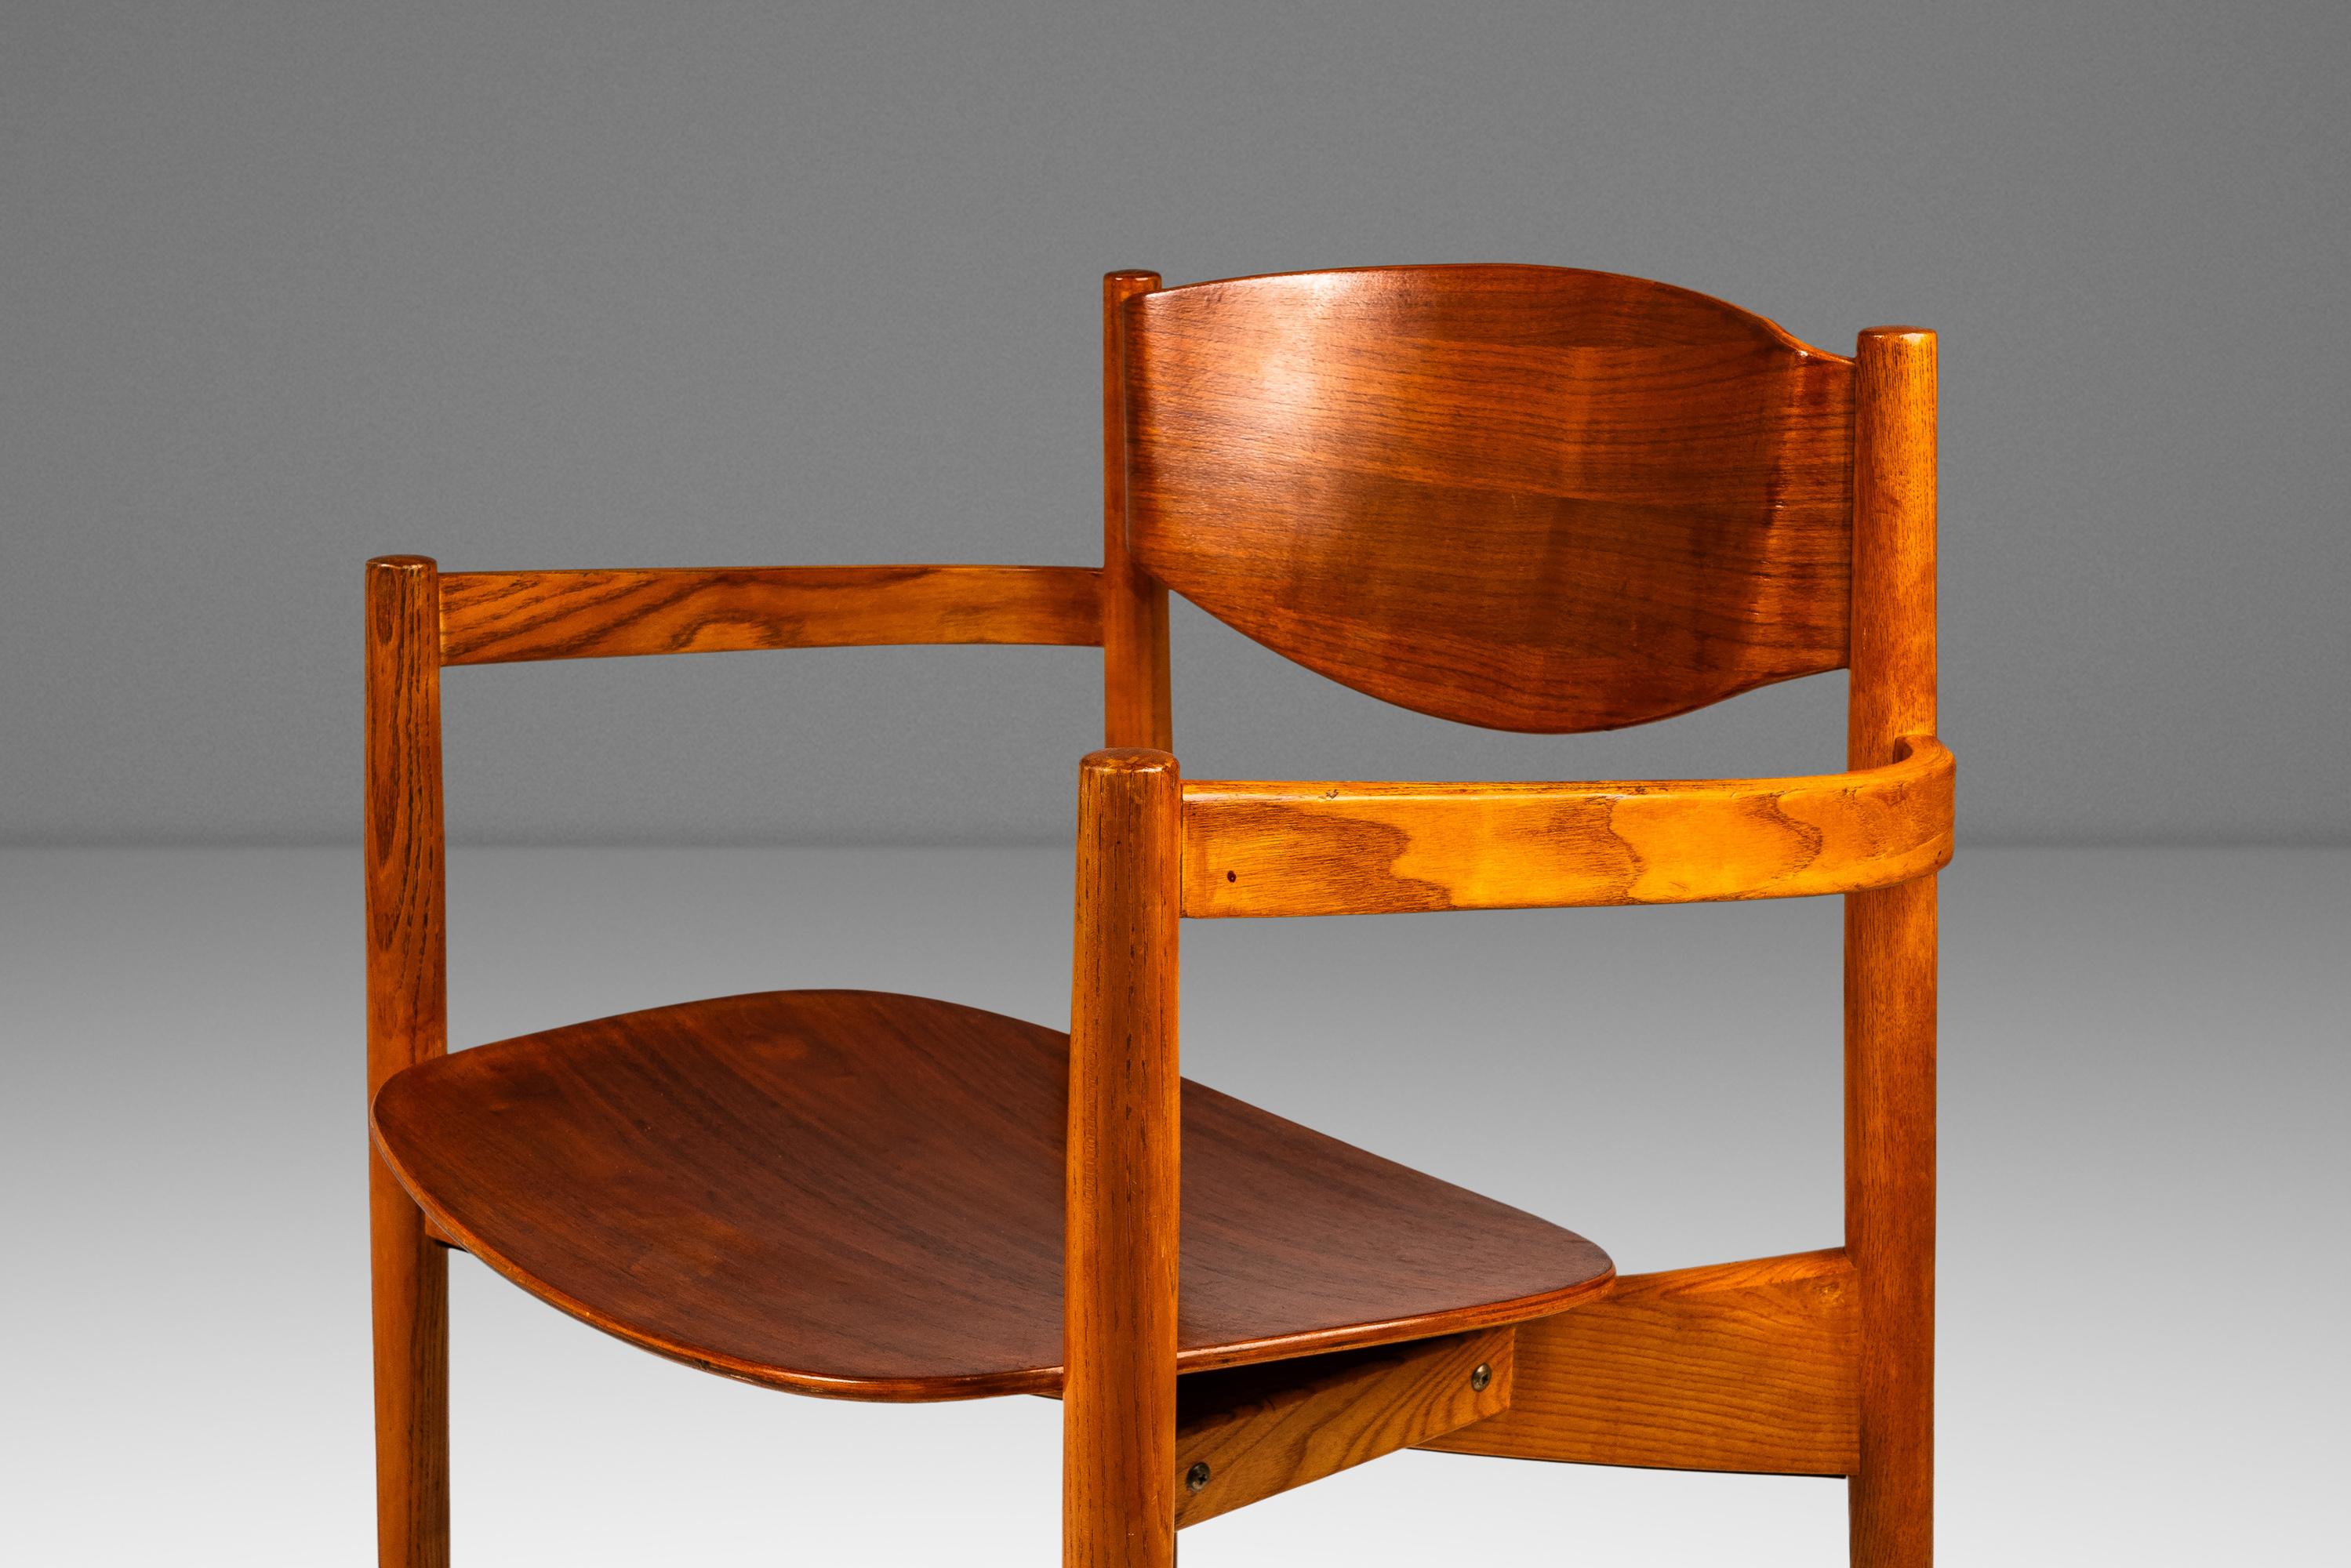 Set of 8 Mid-Century Stacking Chairs: Oak & Walnut, Jens Risom Design, USA, 1960 For Sale 8